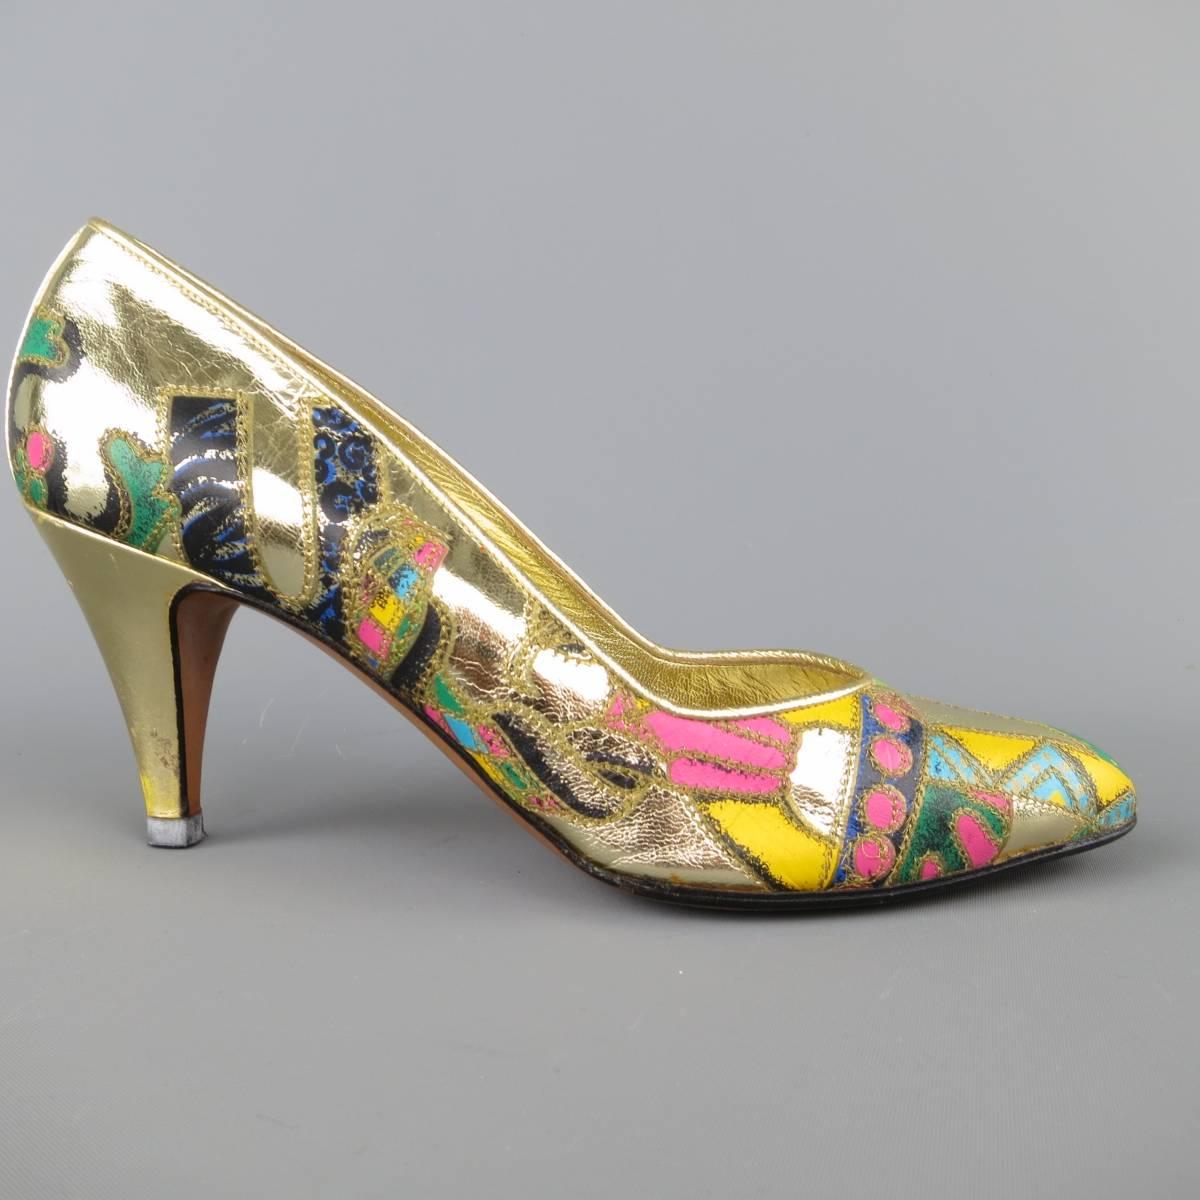 These iconic vintage circa late 1980's GIANNI VERSACE pumps come in a metallic gold leather with asymmetrical, multi-color patchwork VOGUE tribute print. Minor wear and imperfection on heels. As-Is. This archive print was recently brought back for